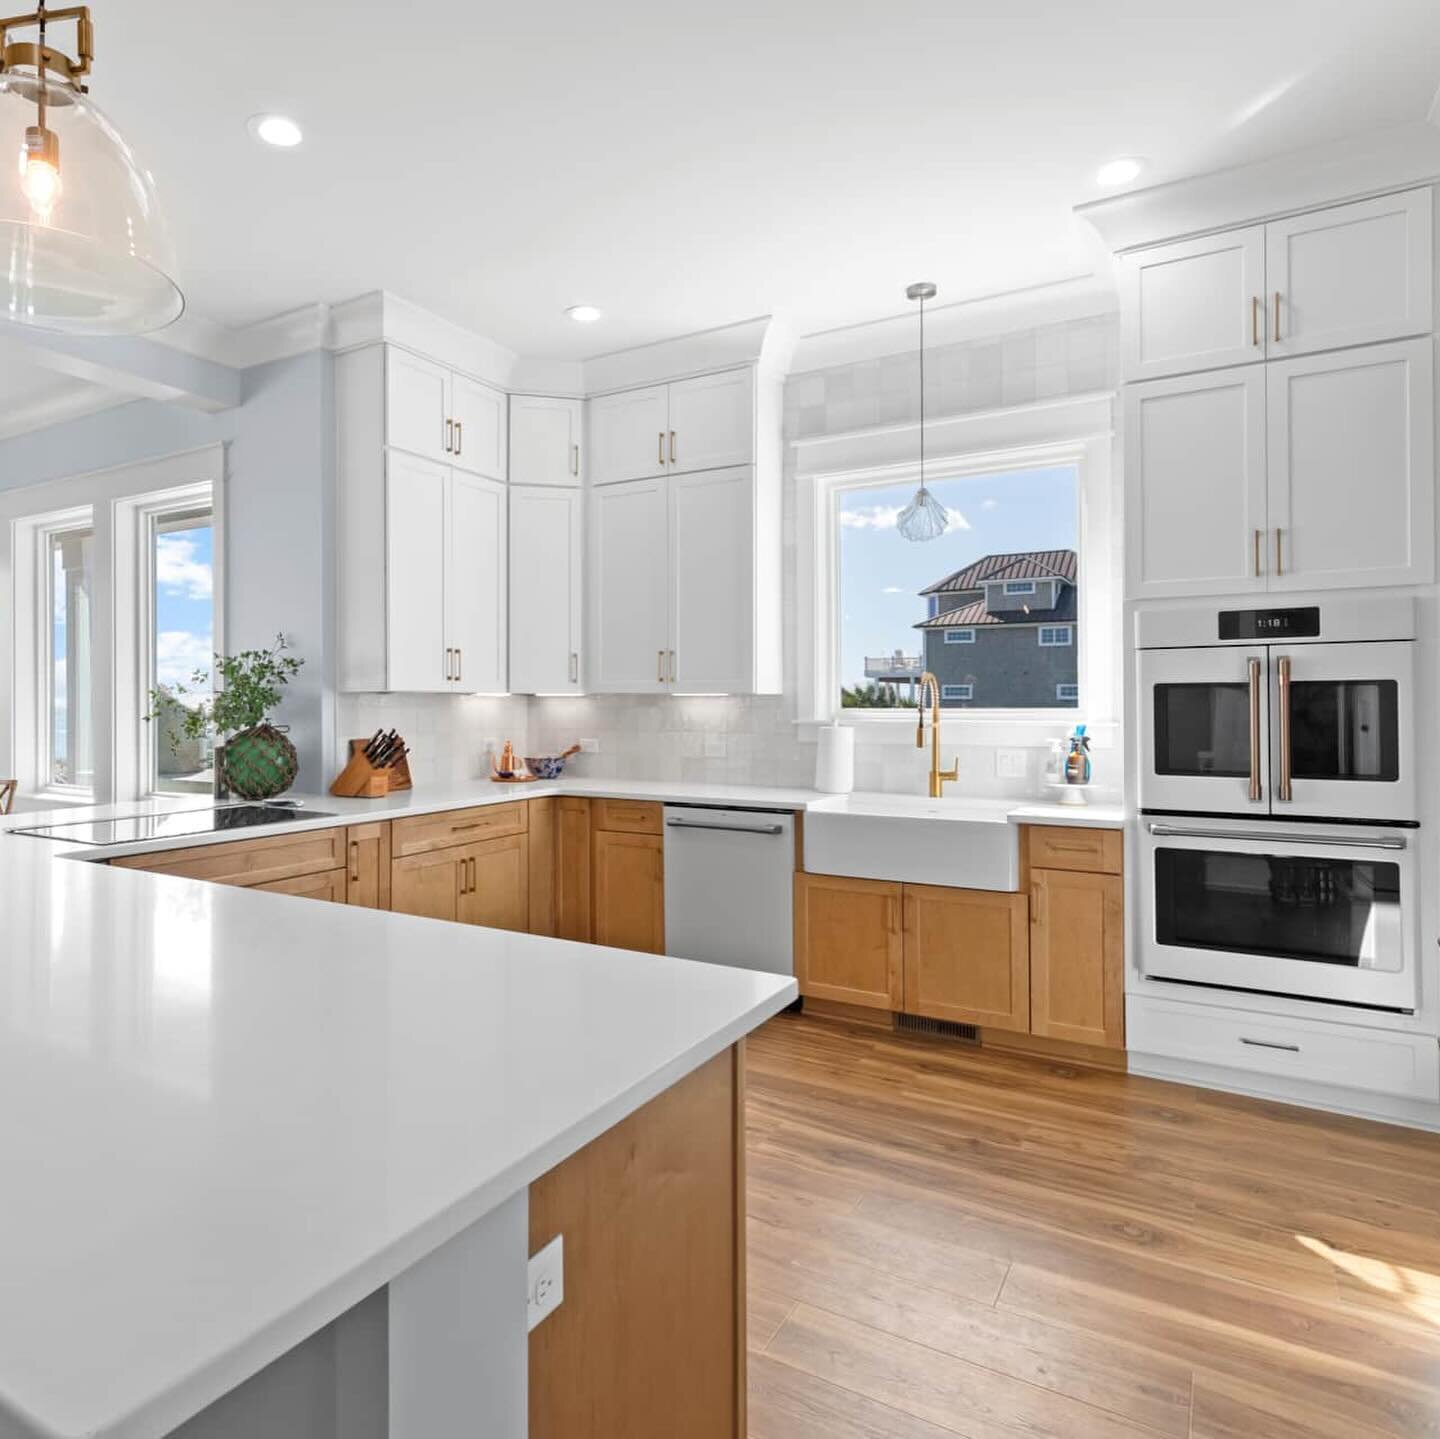 Welcoming spring and beach season with this beautiful waterfront kitchen on Topsail Island. This stunning home features our pairing of Maple Rye and Painted Linen cabinetry that lean perfectly into the coastal lifestyle.

If you&rsquo;re looking for 